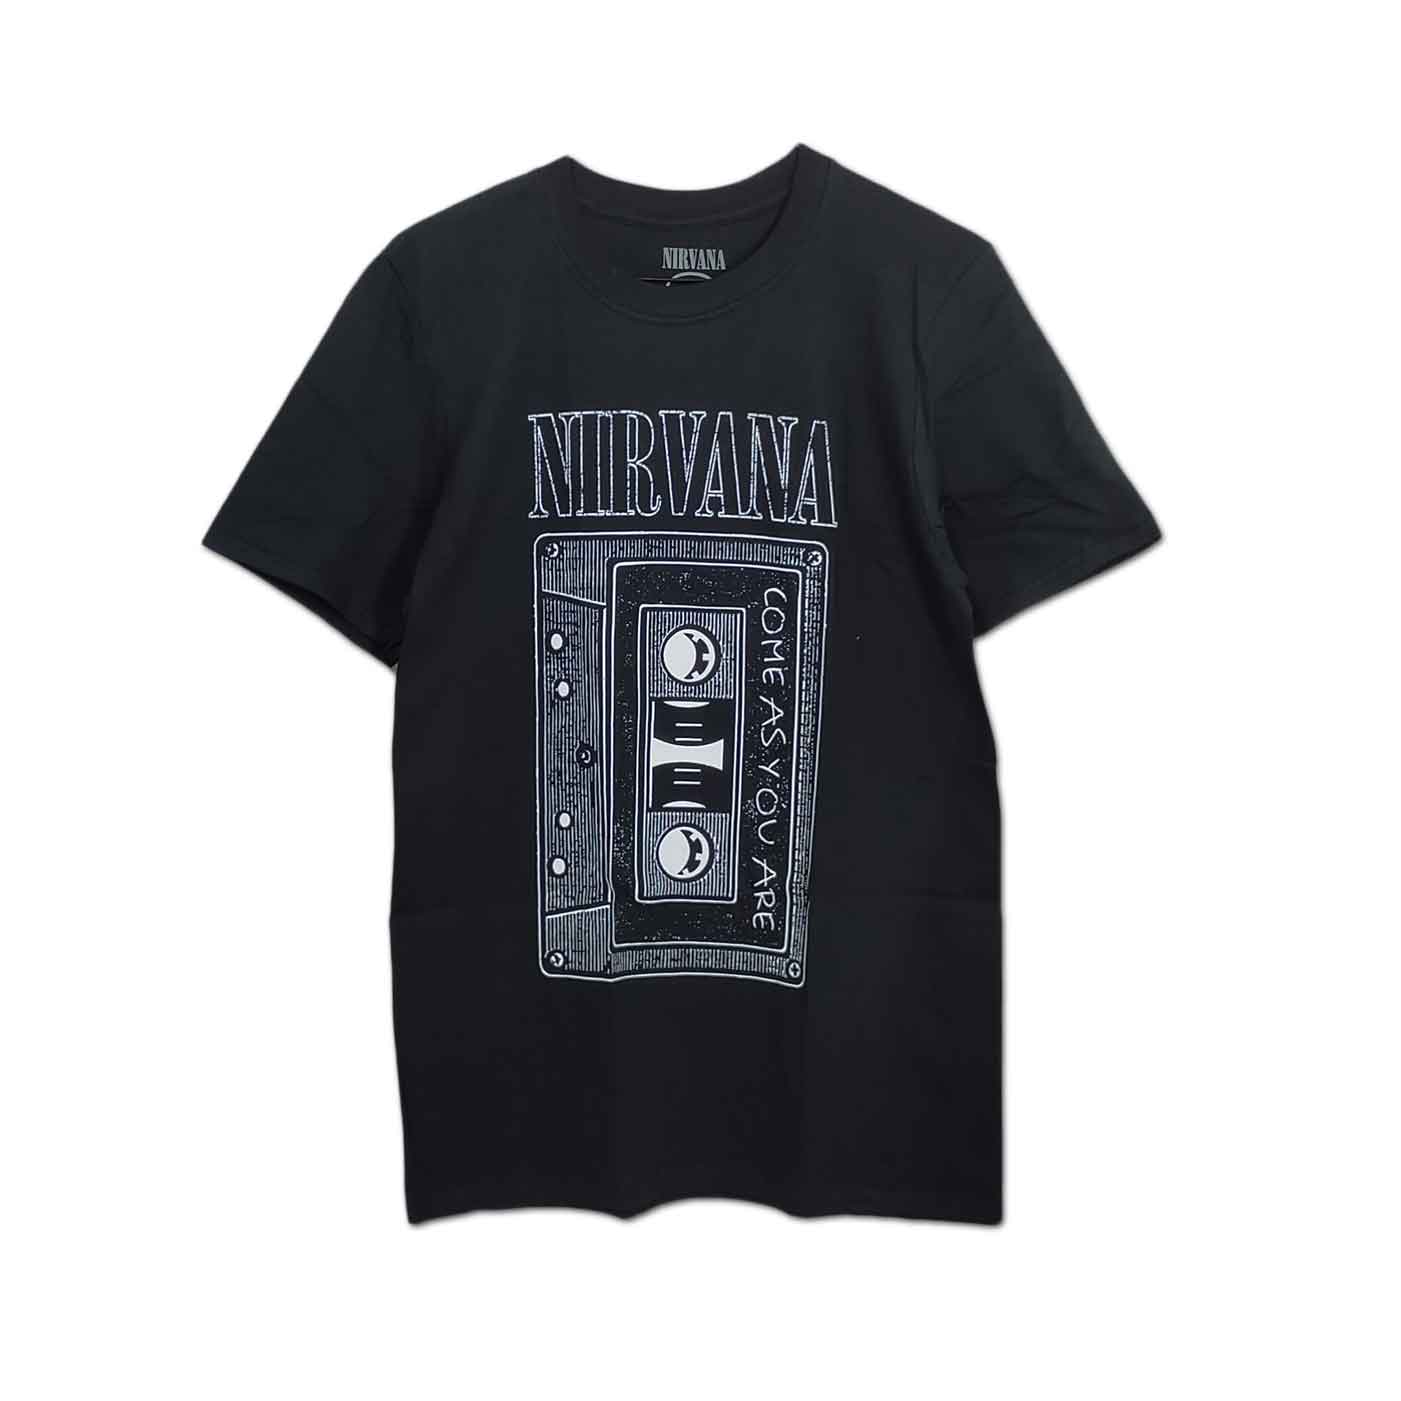 Nirvana バンドTシャツ ニルヴァーナ Come As You Are Tape - バンドT 